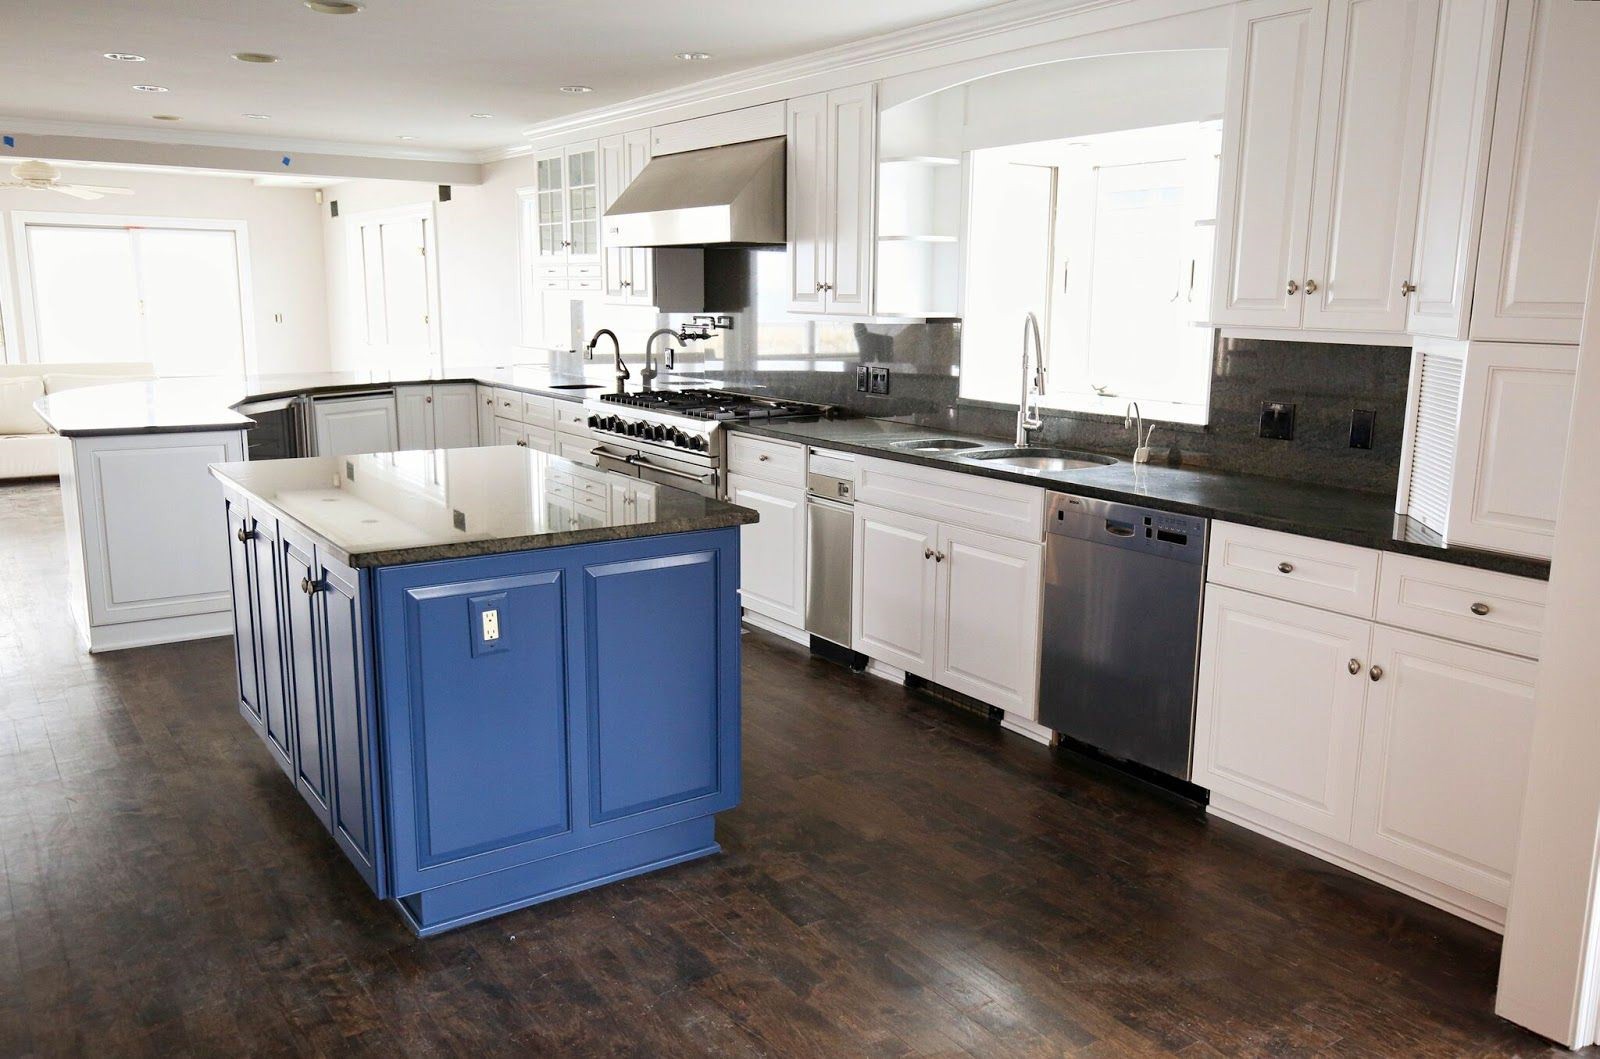 Don't want to refinish your entire kitchen? What about just your kitchen island?